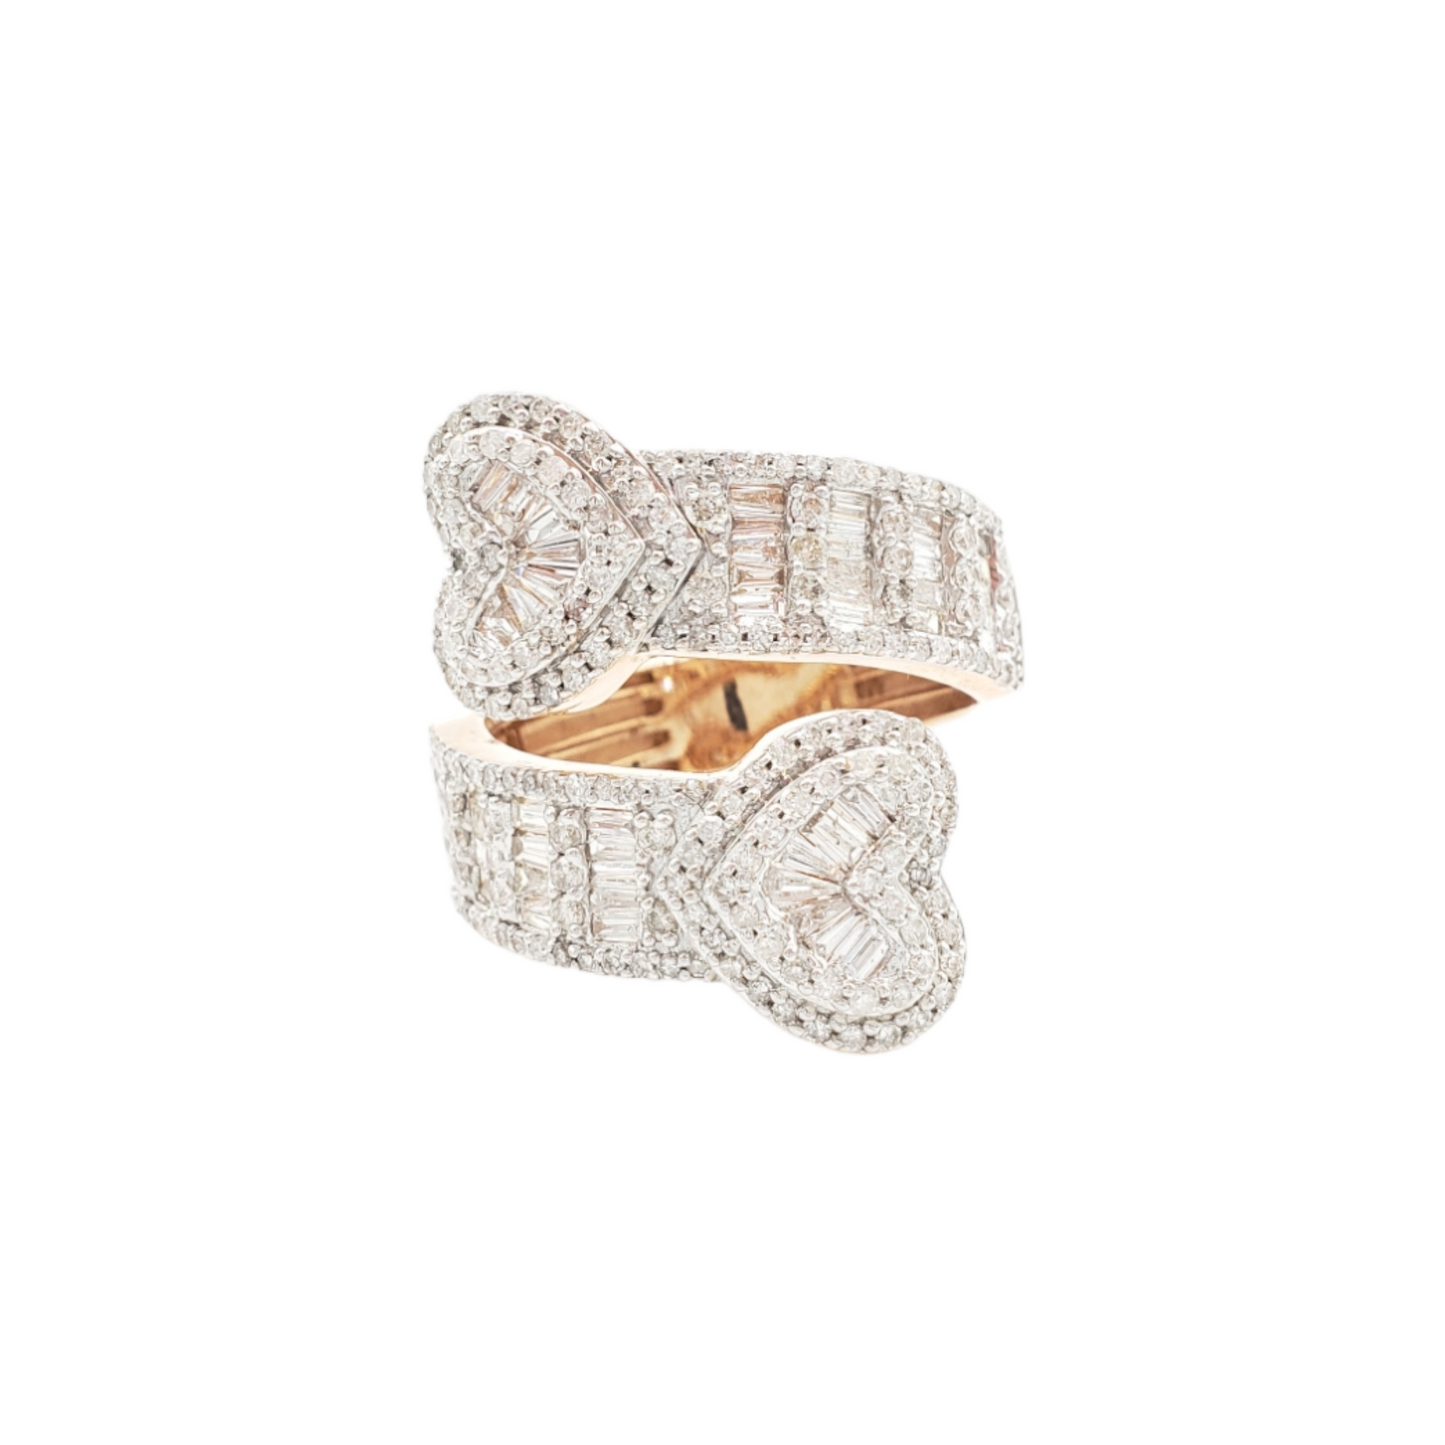 14k Heart Baguette Diamond Ring With 2.54 Carats Of Diamonds #23327